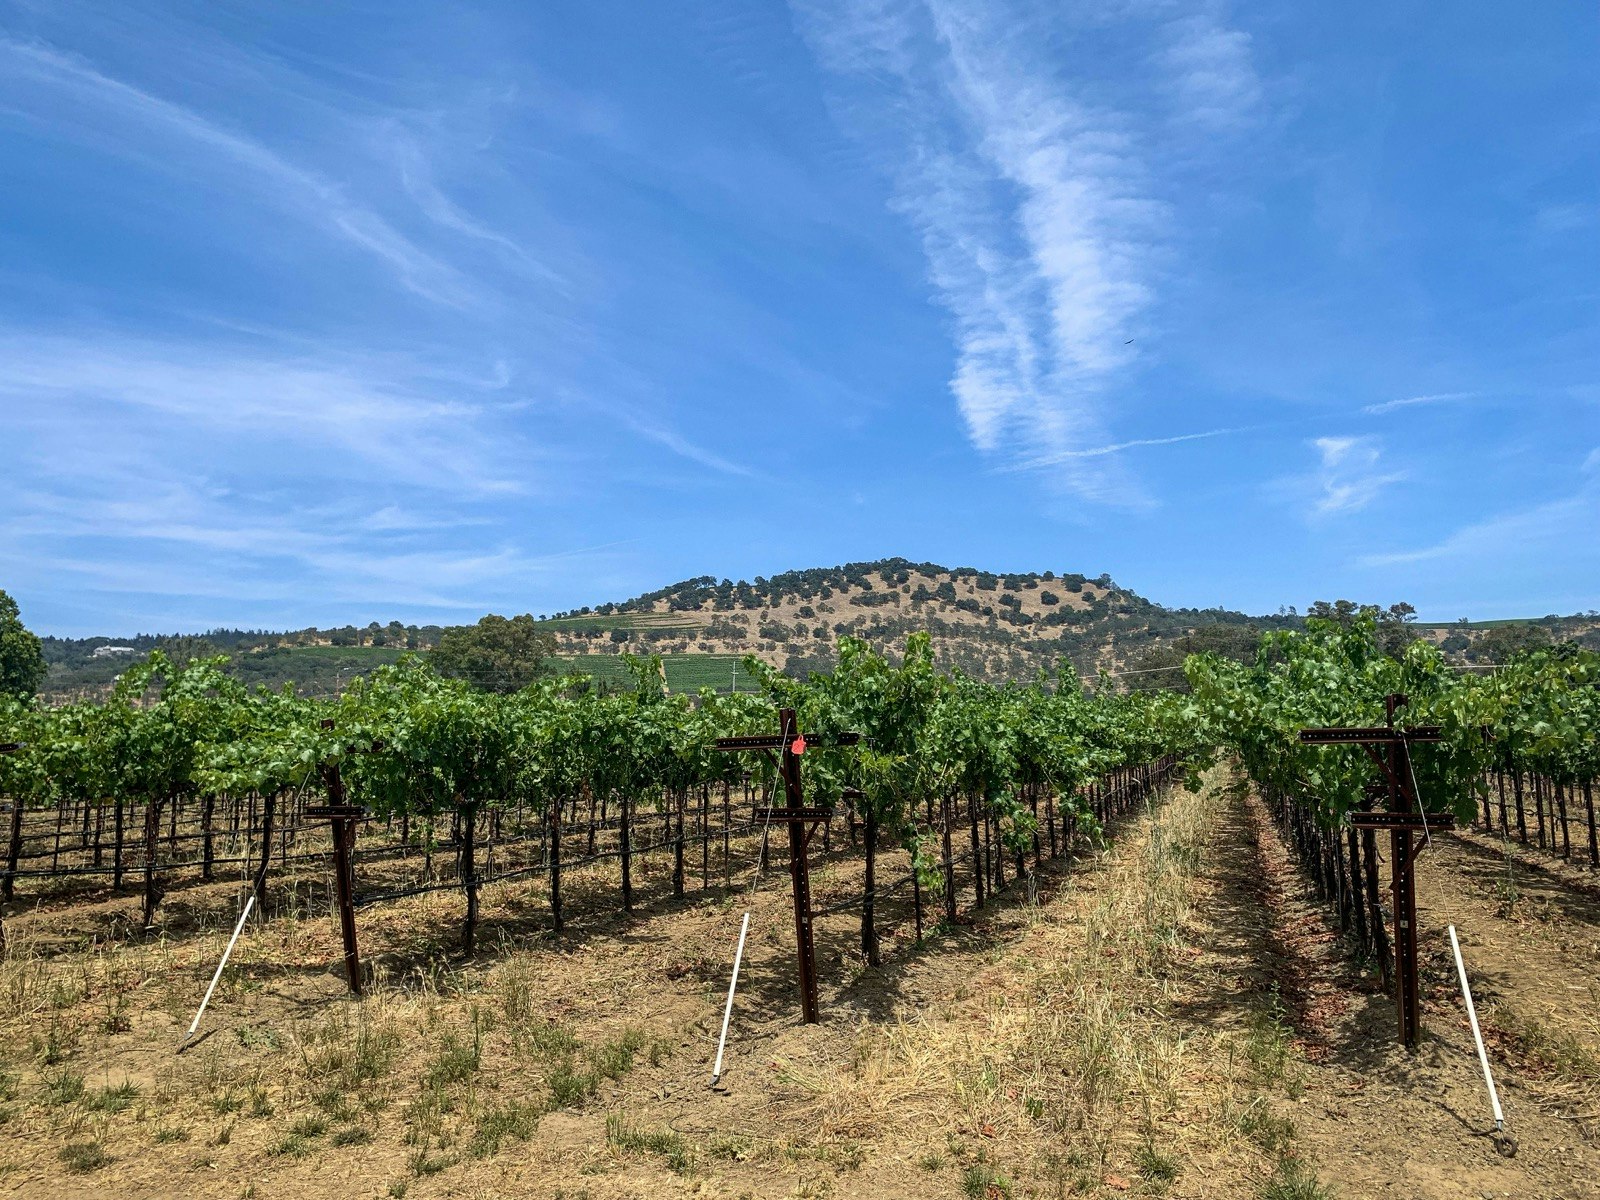 Rows of grapes under a blue sky in California wine country